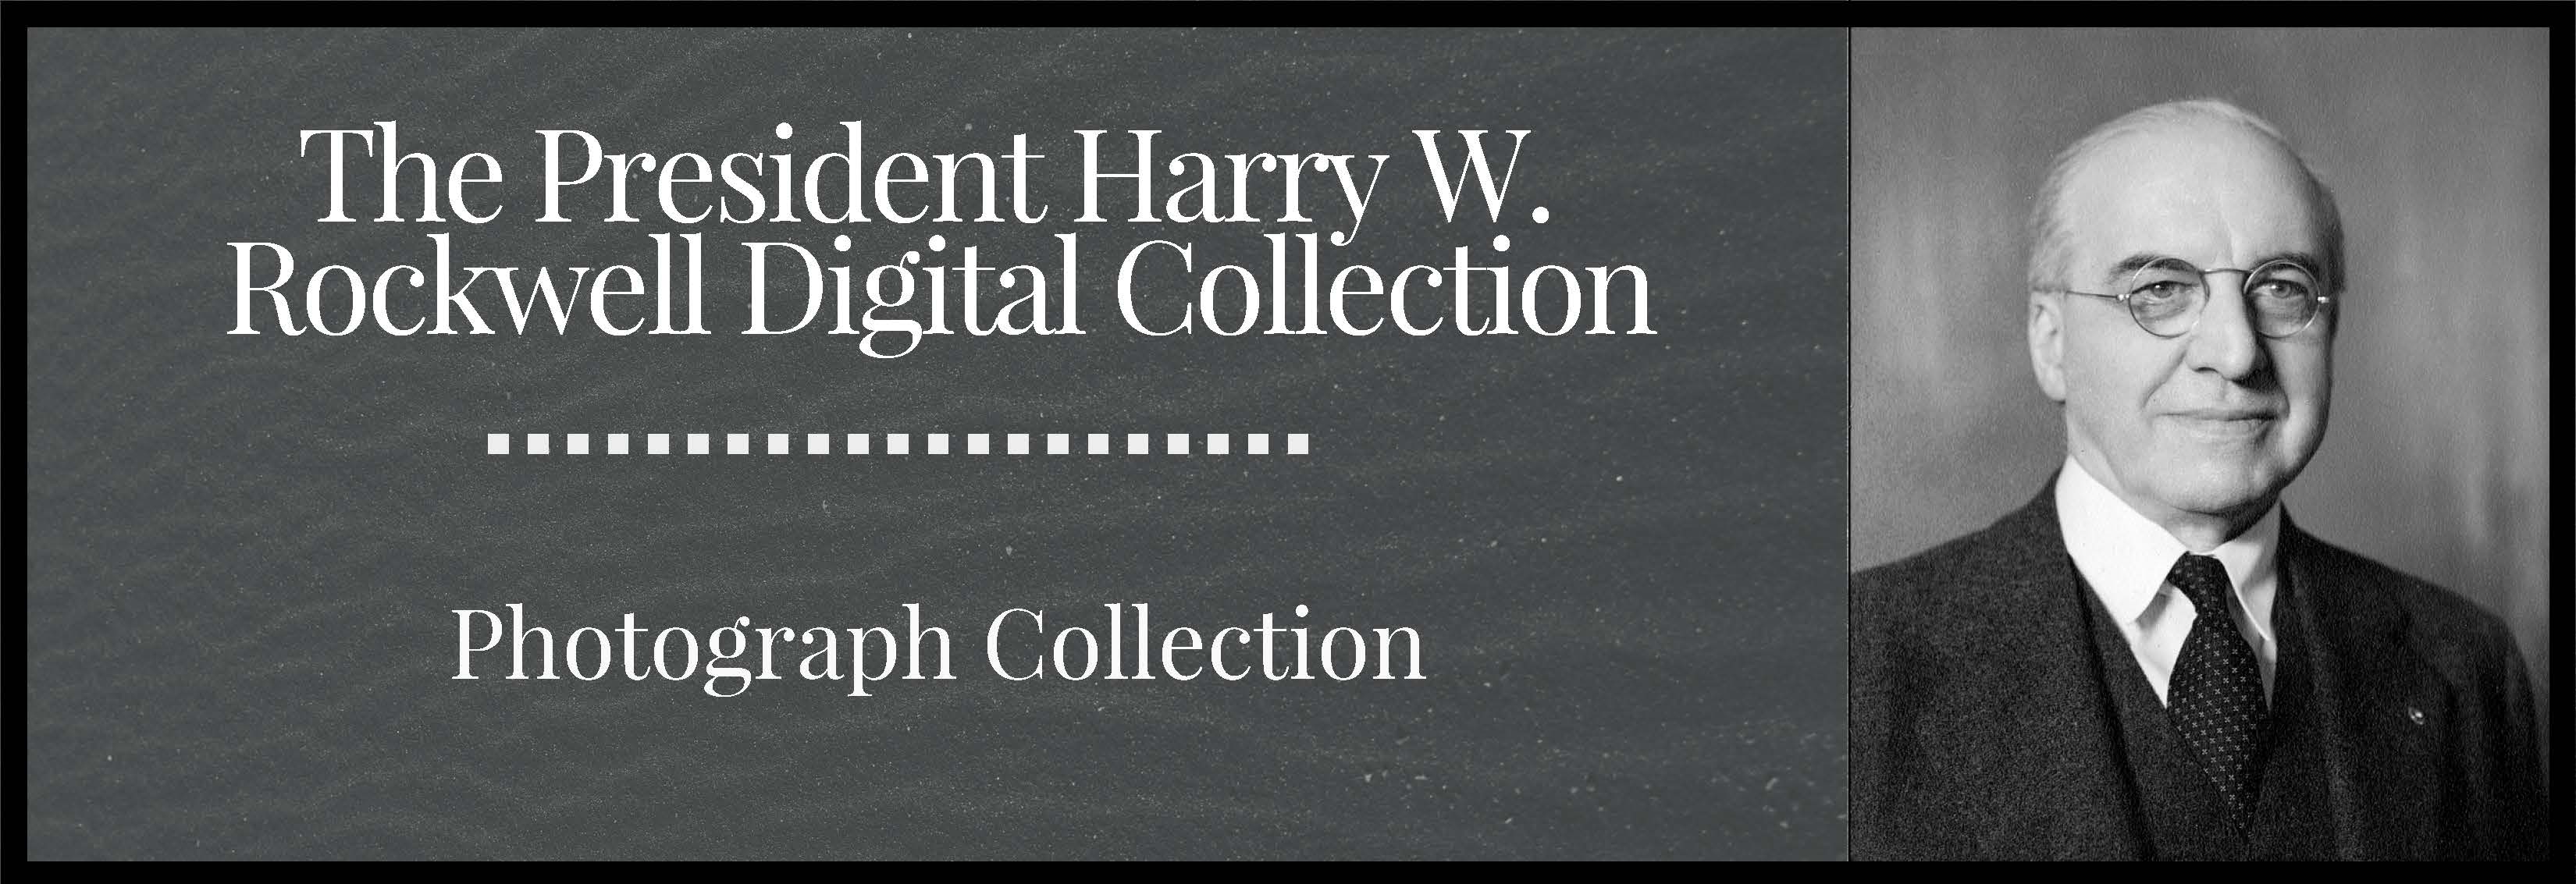 The President Harry W. Rockwell's Photograph Collection